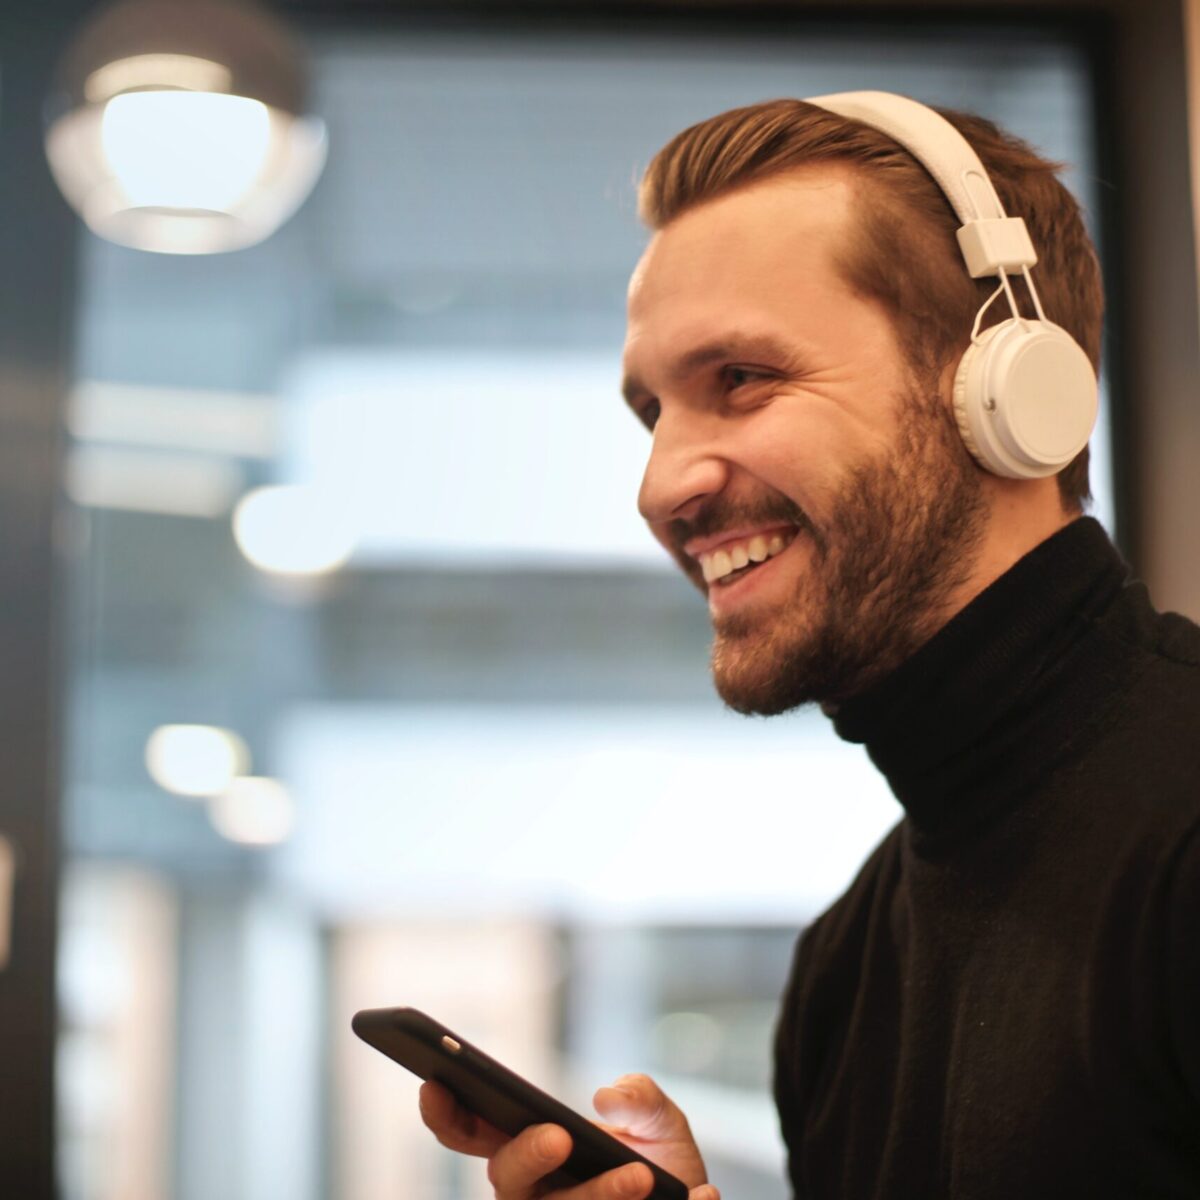 Man laughing with headphones on